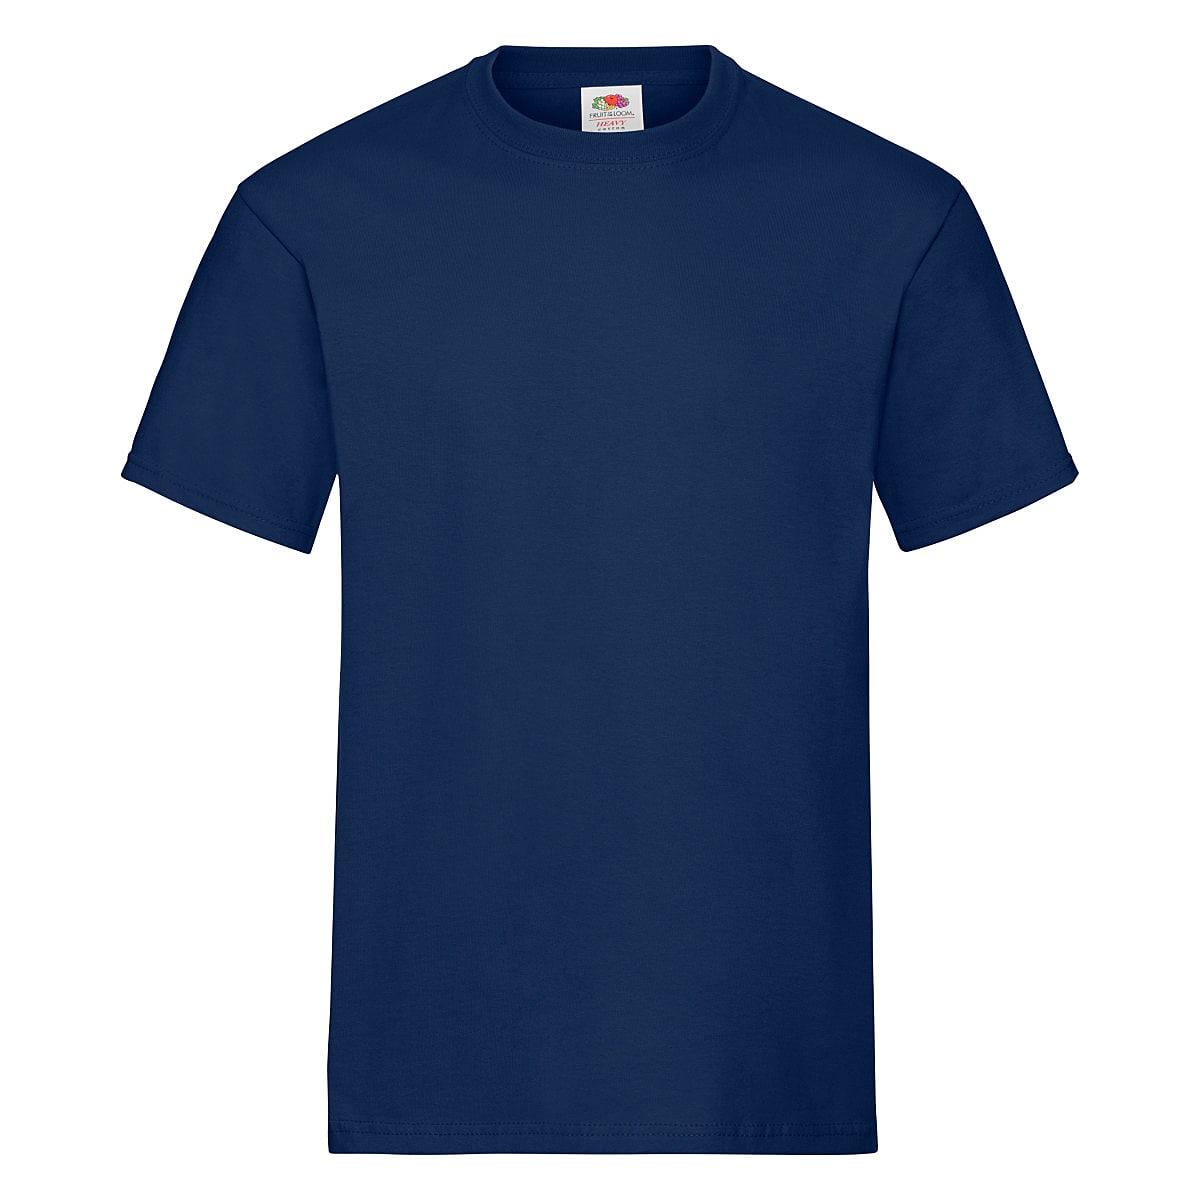 Fruit Of The Loom Heavy Cotton T-Shirt in Navy Blue (Product Code: 61212)